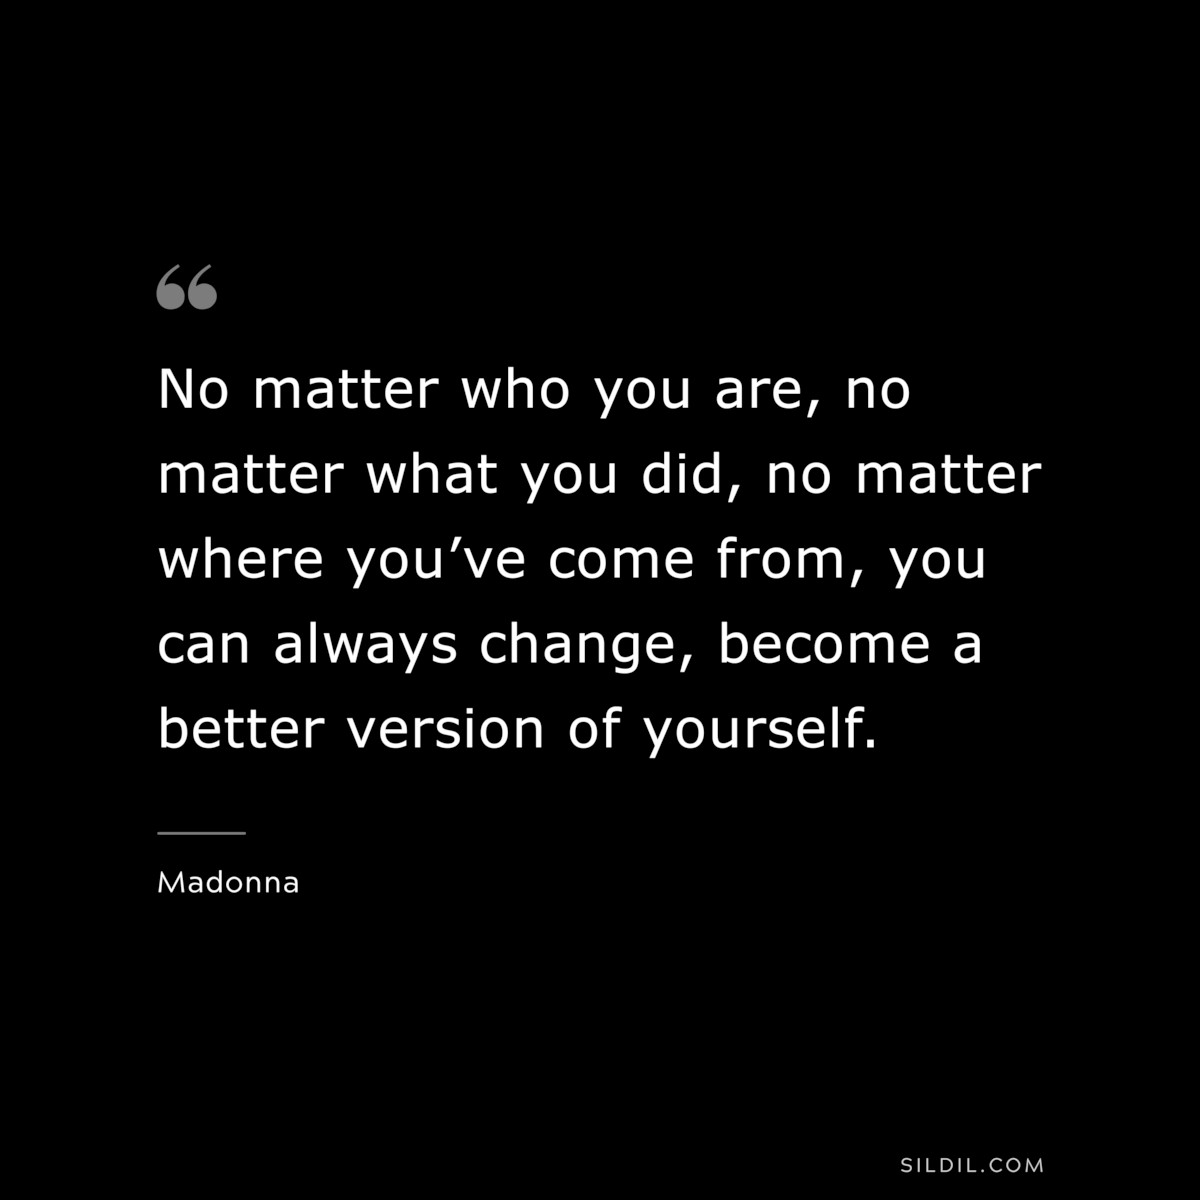 No matter who you are, no matter what you did, no matter where you’ve come from, you can always change, become a better version of yourself. ― Madonna